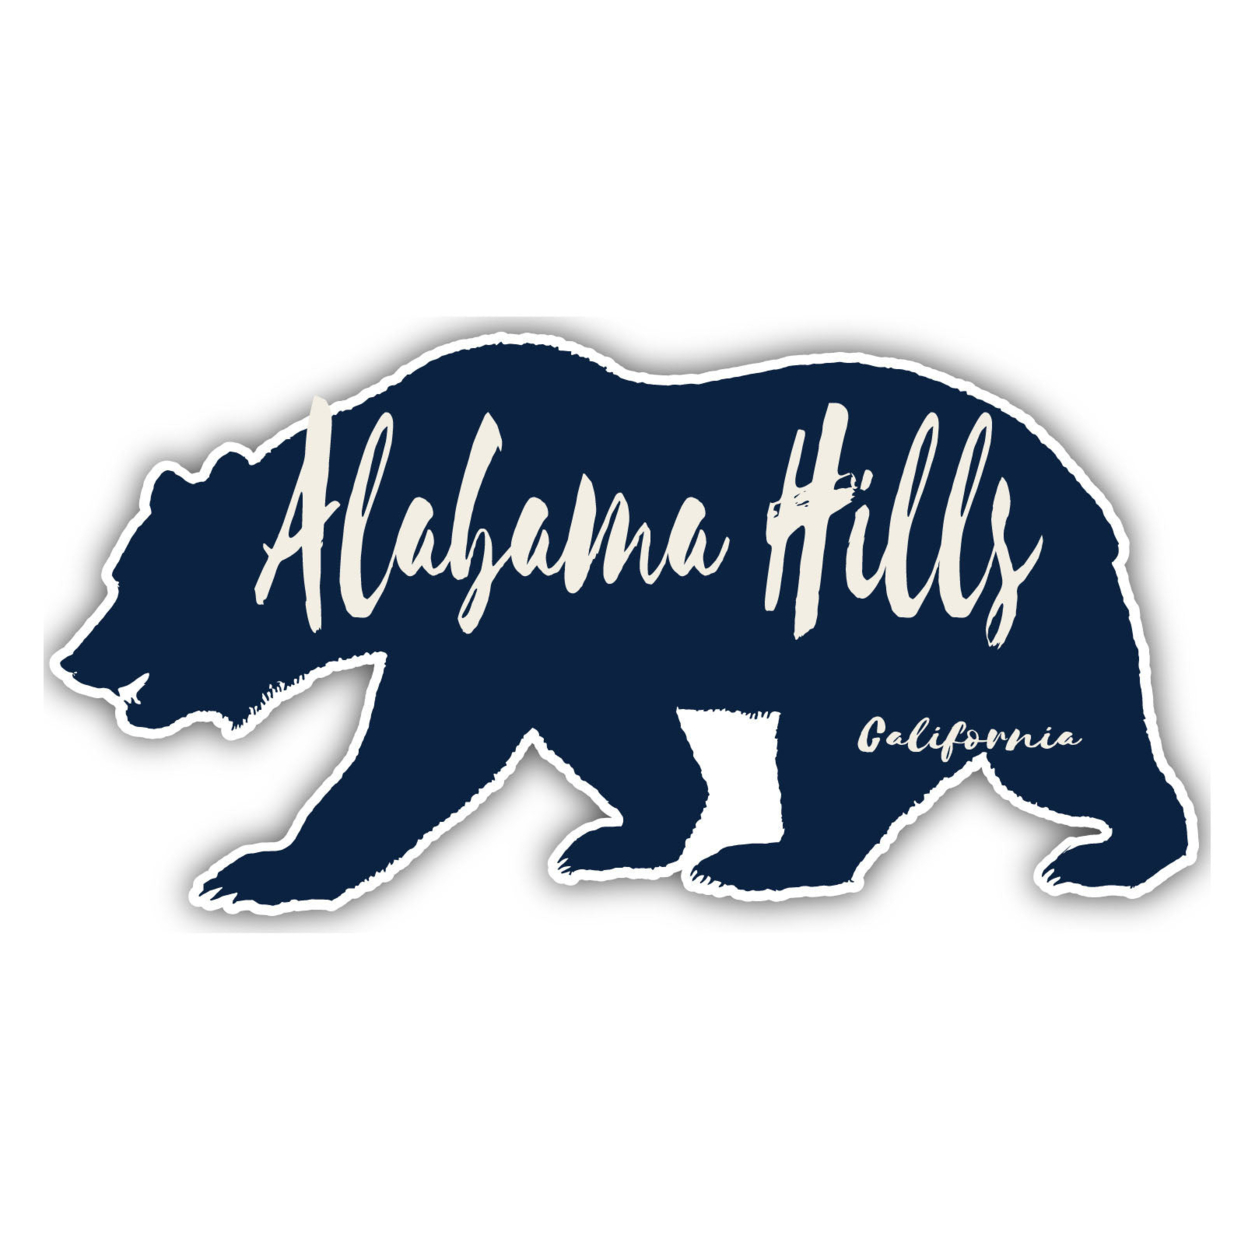 Alabama Hills California Souvenir Decorative Stickers (Choose Theme And Size) - Single Unit, 8-Inch, Great Outdoors